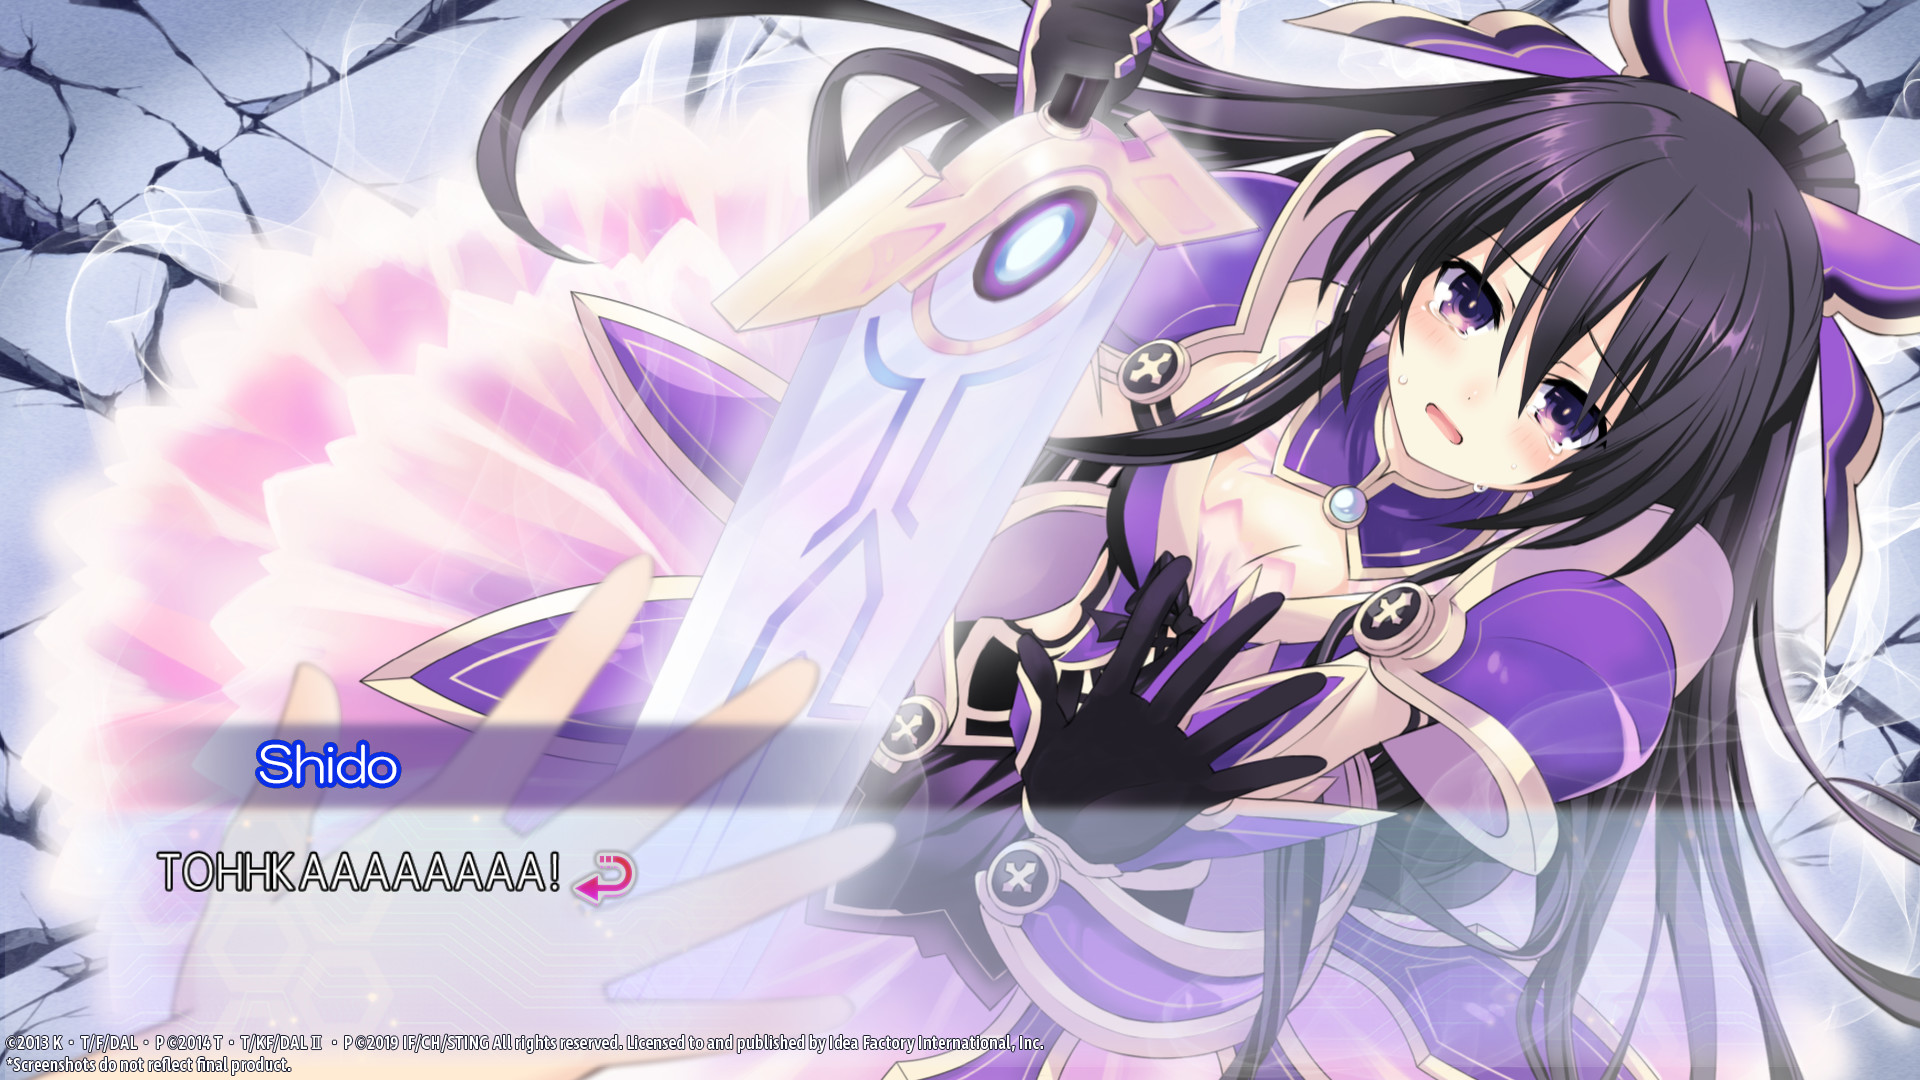 DATE A LIVE Deluxe Bundle Steam CD Key